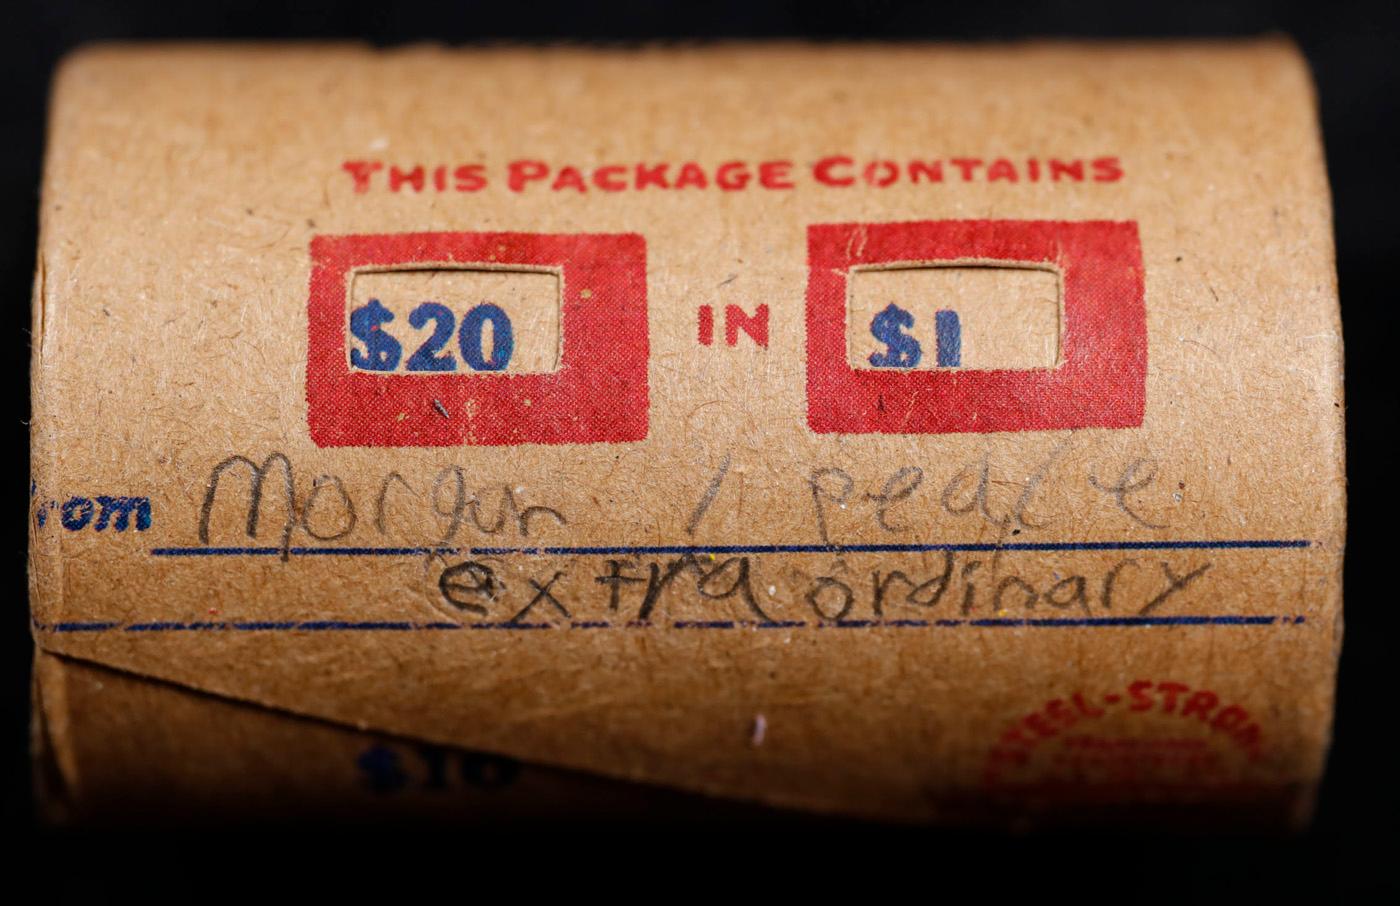 High Value - Mixed Covered End Roll - Marked "Morgan/Peace Extraordinary" - Weight shows x20 Coins (